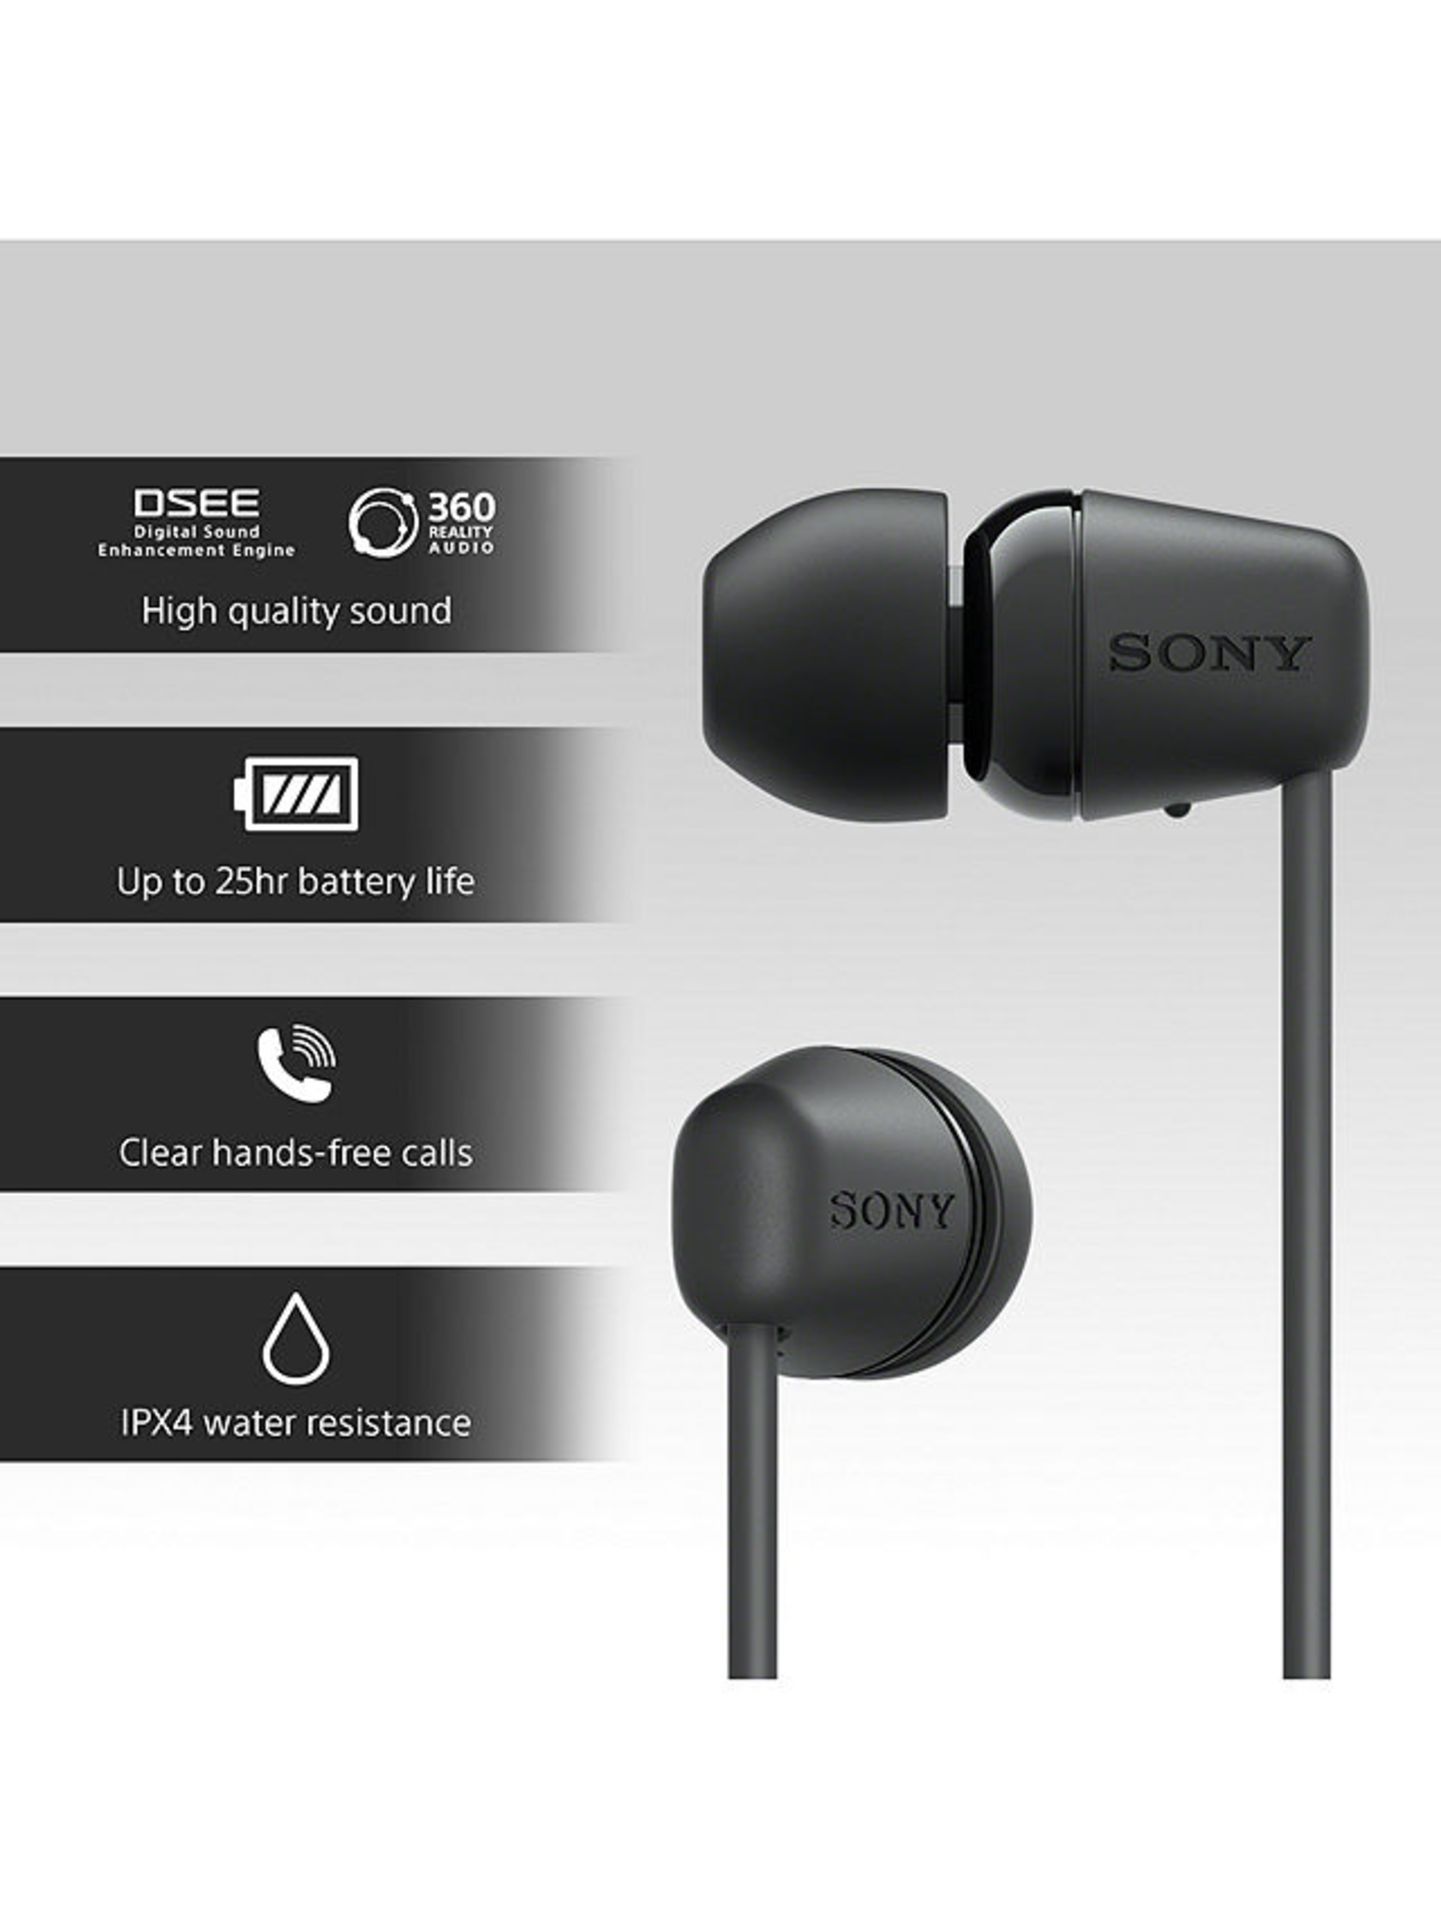 SONY WI-C100 BLUETOOTH WIRELESS IN-EAR HEADPHONES WITH MIC/REMOTE IN BLACK - RRP £35 - Image 4 of 6